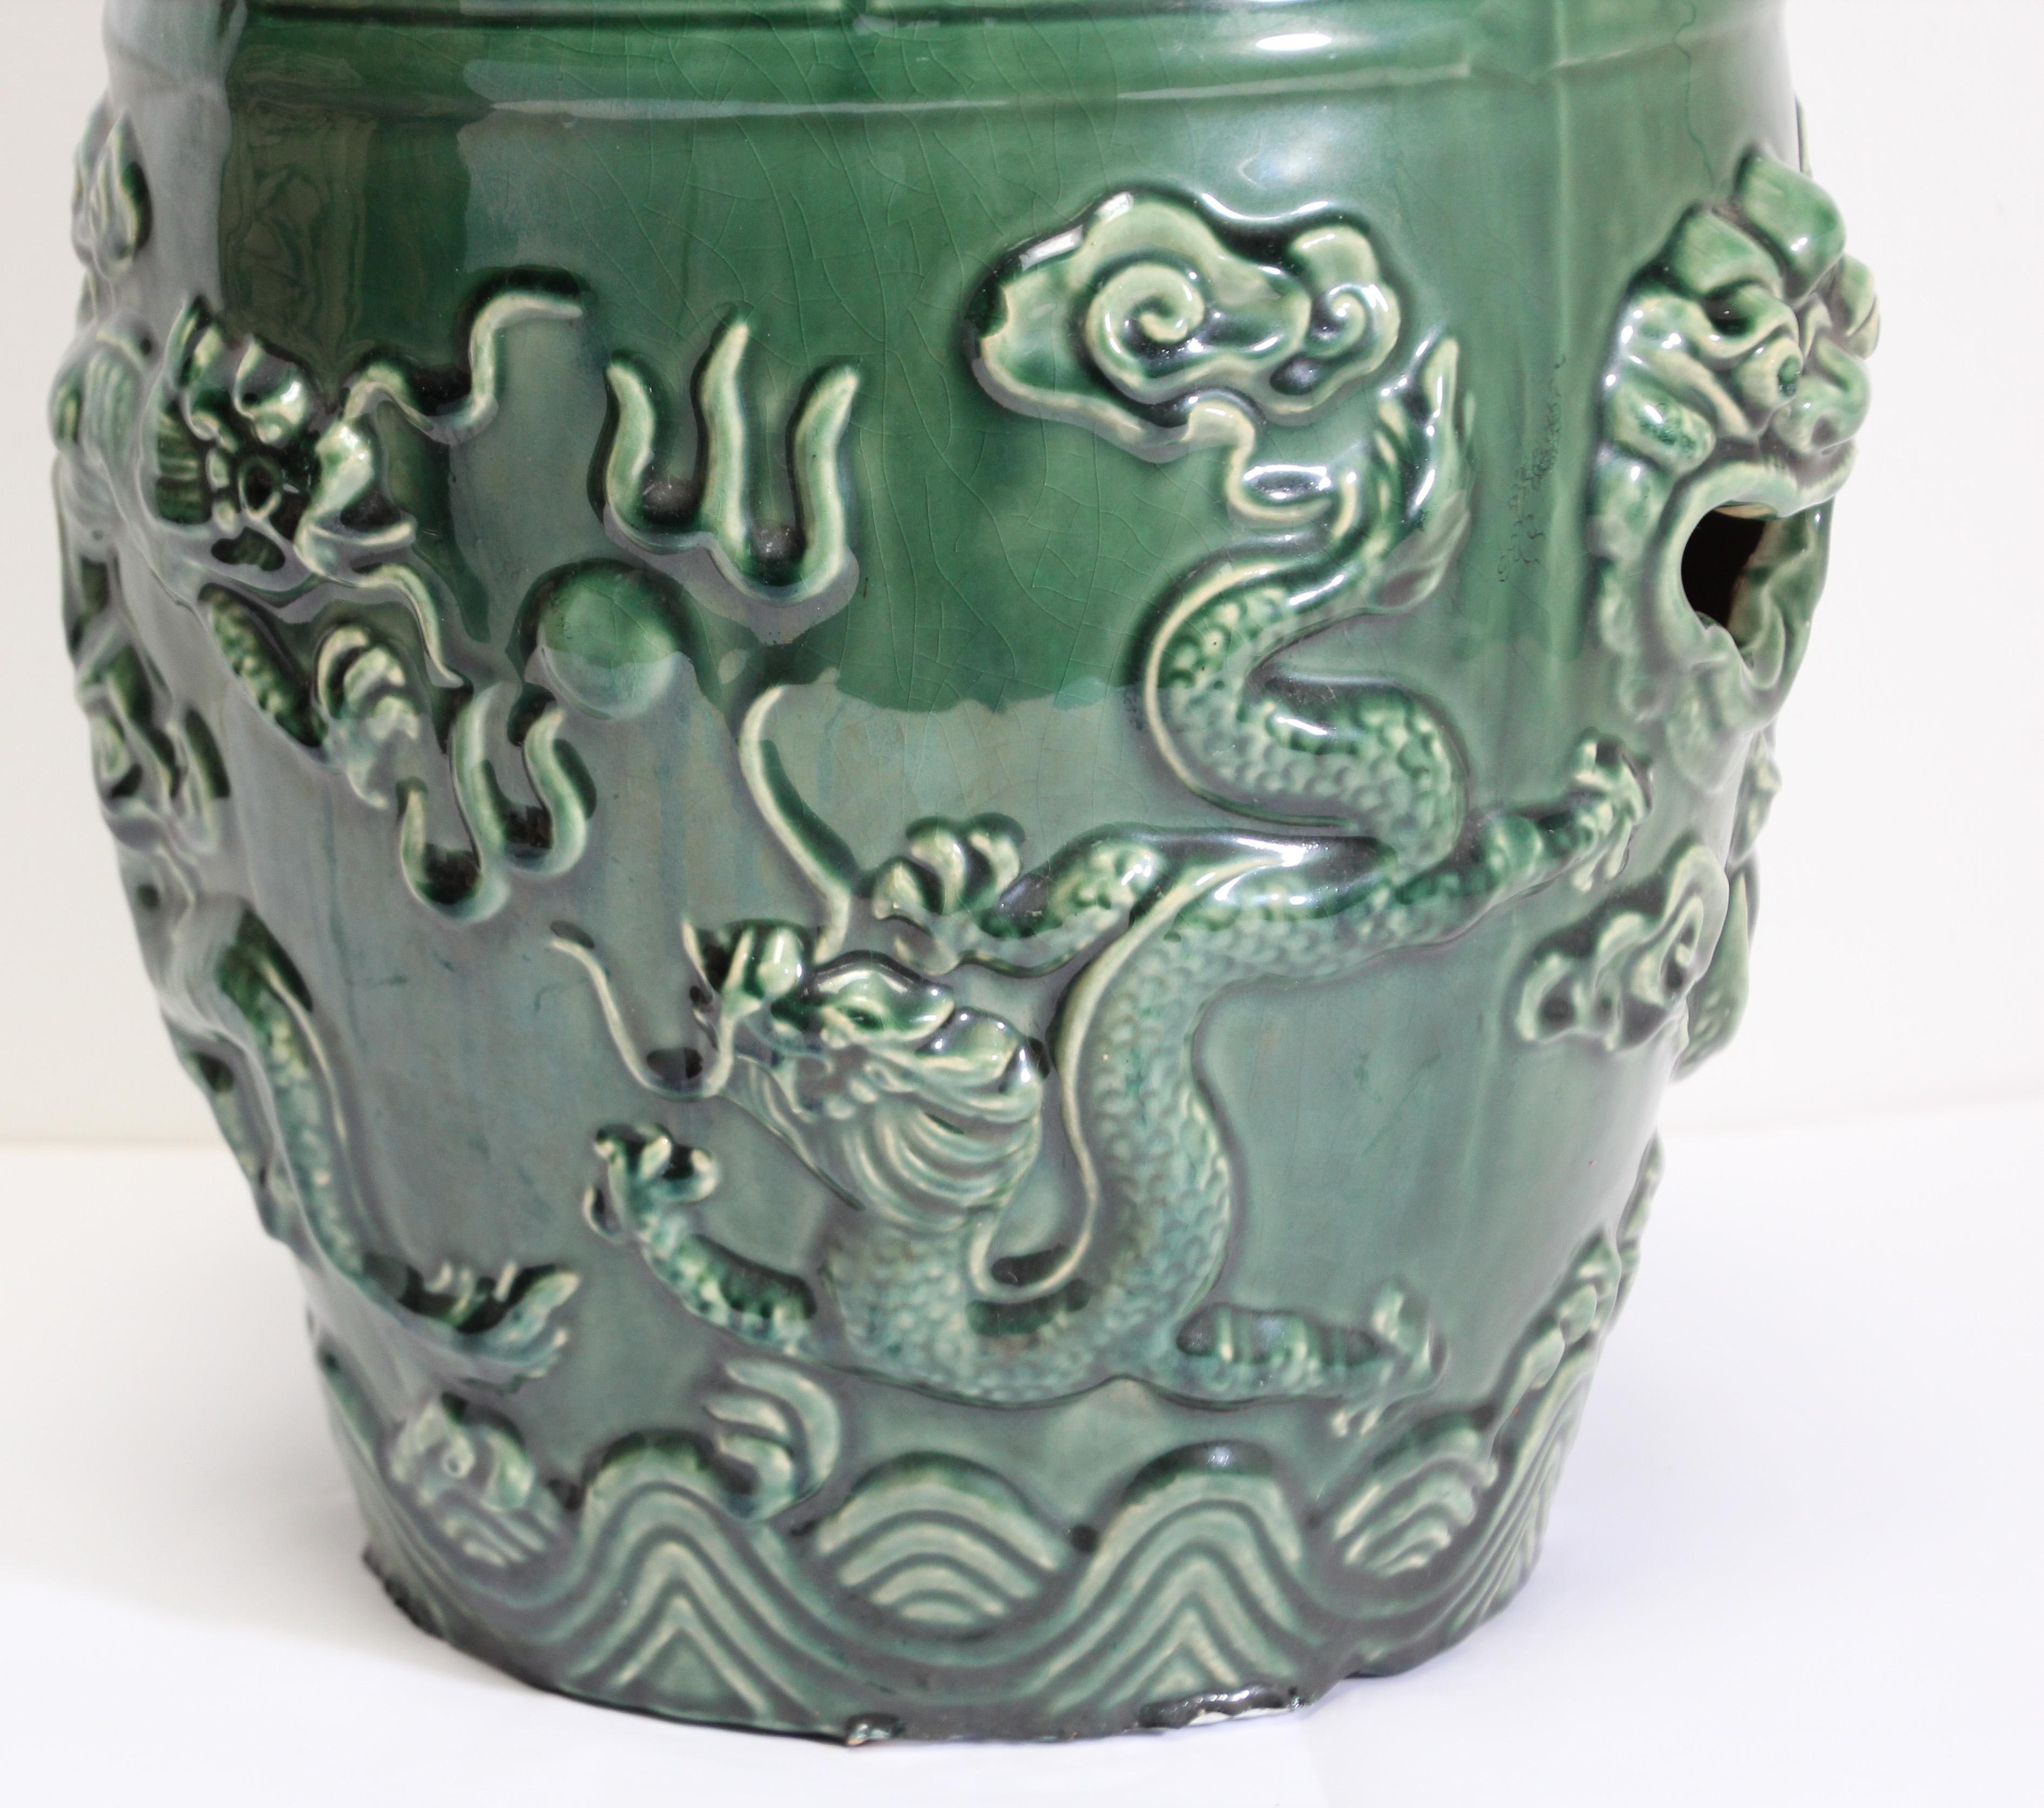 Emerald Green Chinese Ceramic Garden Stool with Dragons 7